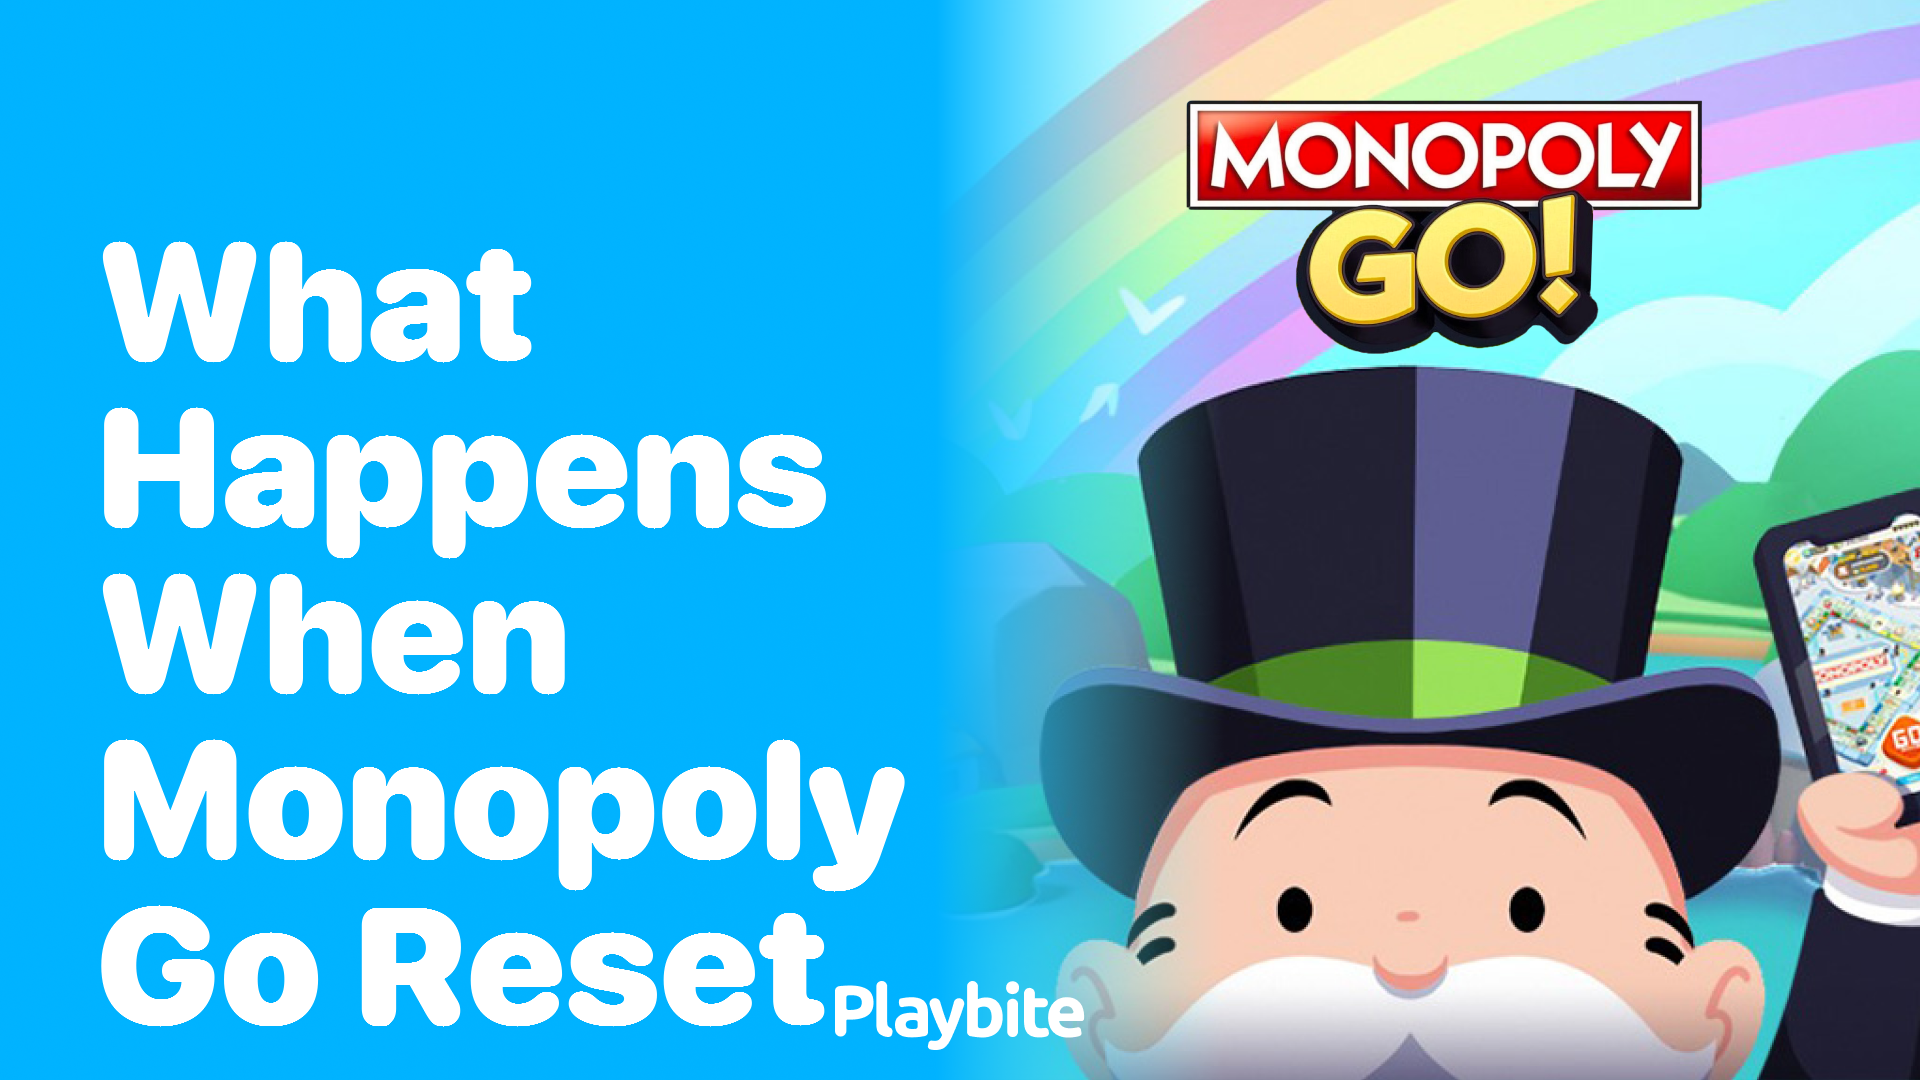 What Happens When Monopoly Go Resets?